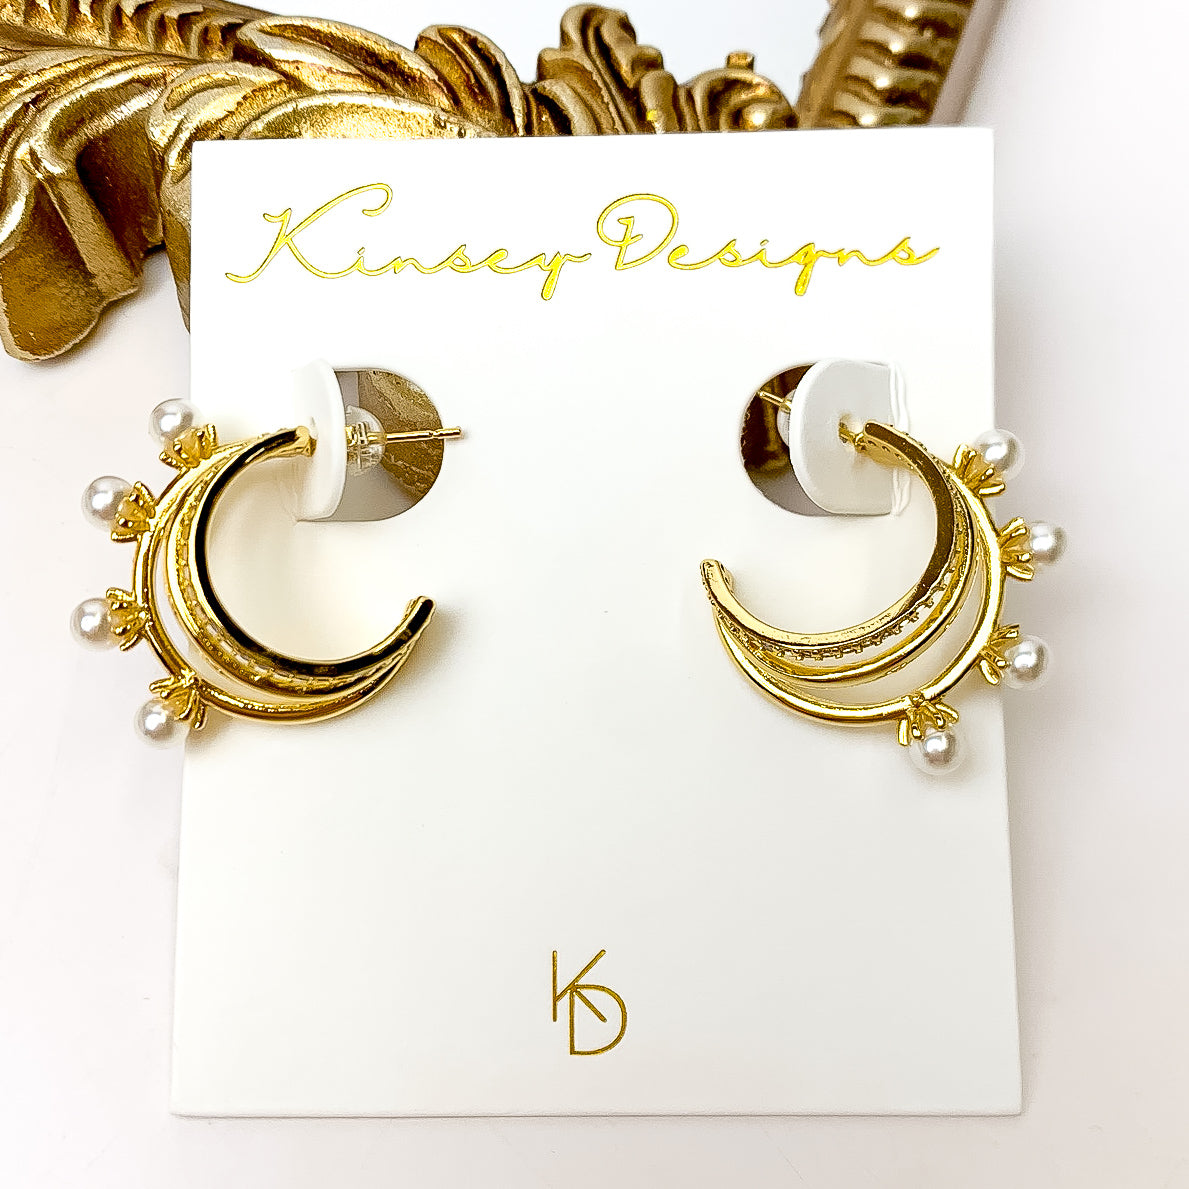 Kinsey Designs | Hattie Pearl Earrings - Giddy Up Glamour Boutique